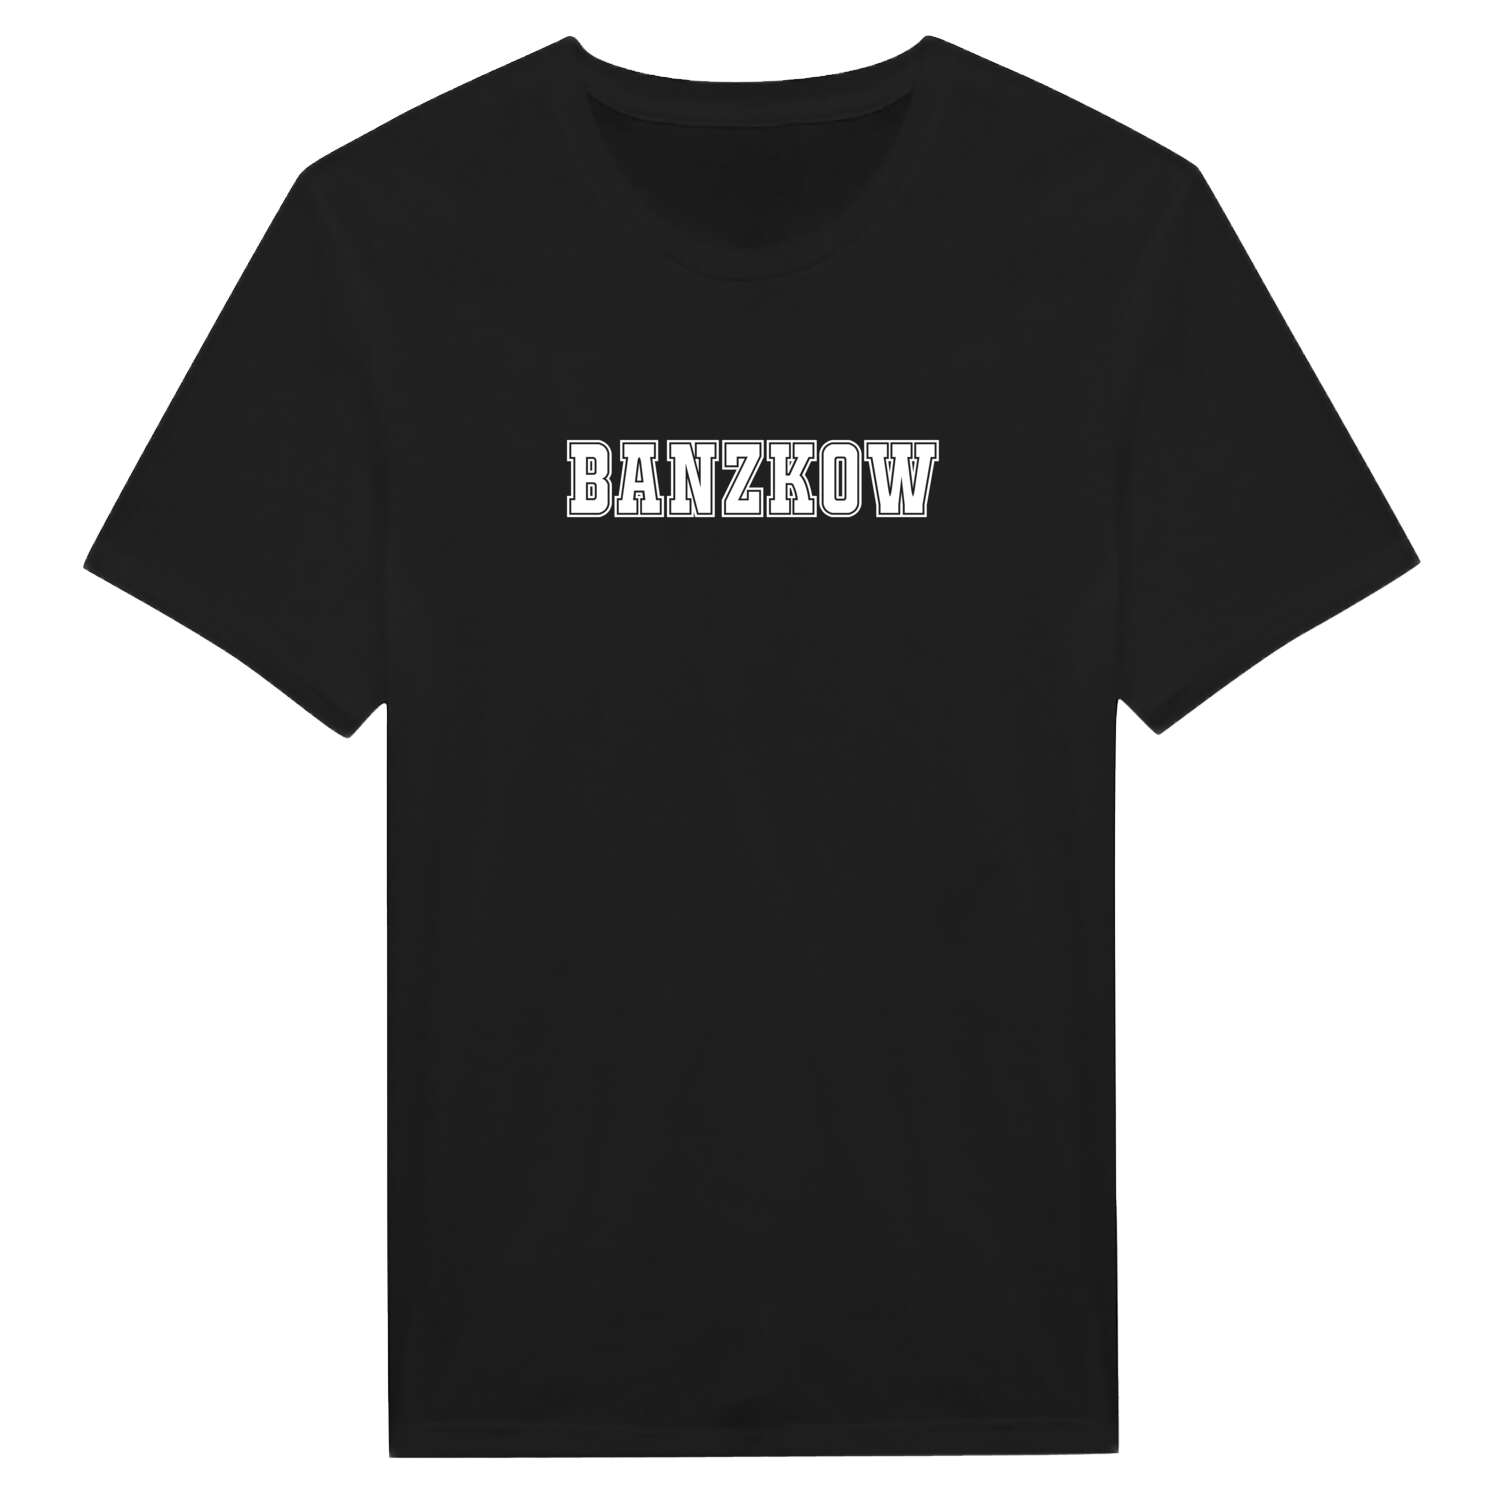 Banzkow T-Shirt »Classic«